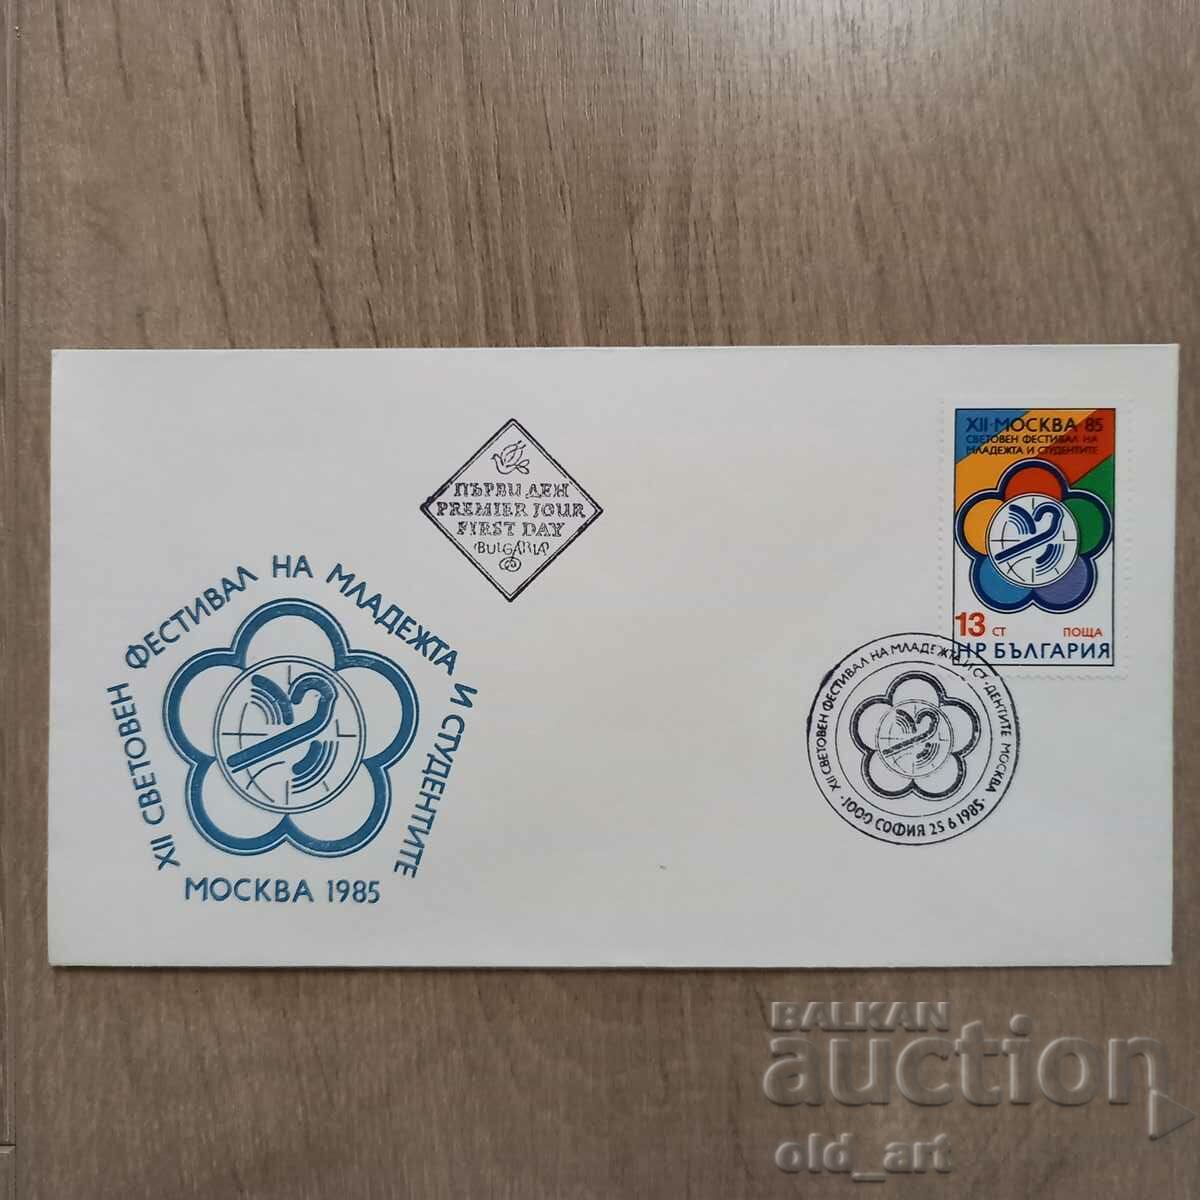 Postal envelope - XII World. festival of youth and students